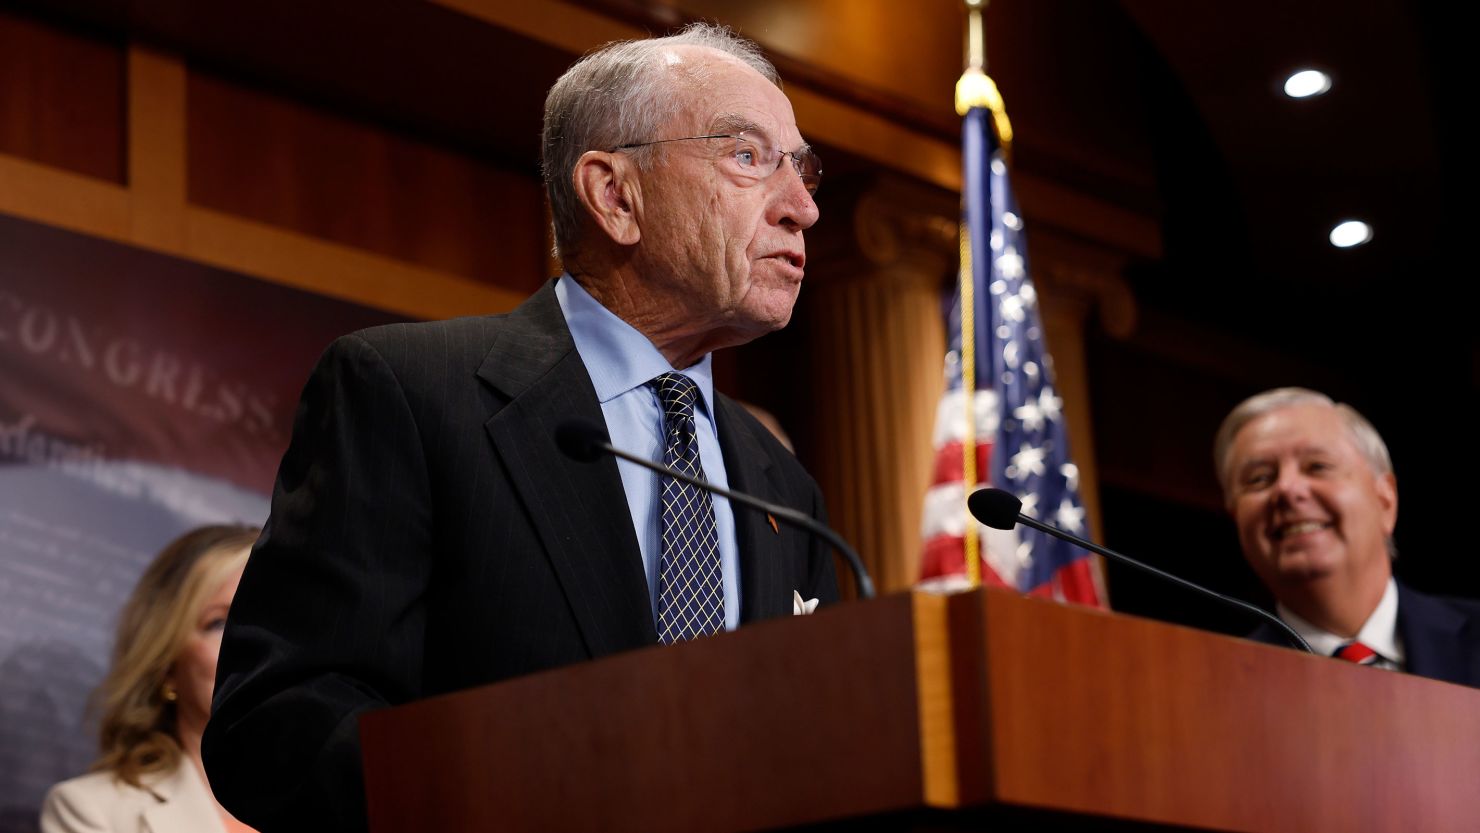 Chuck Grassley Discharged from Hospital